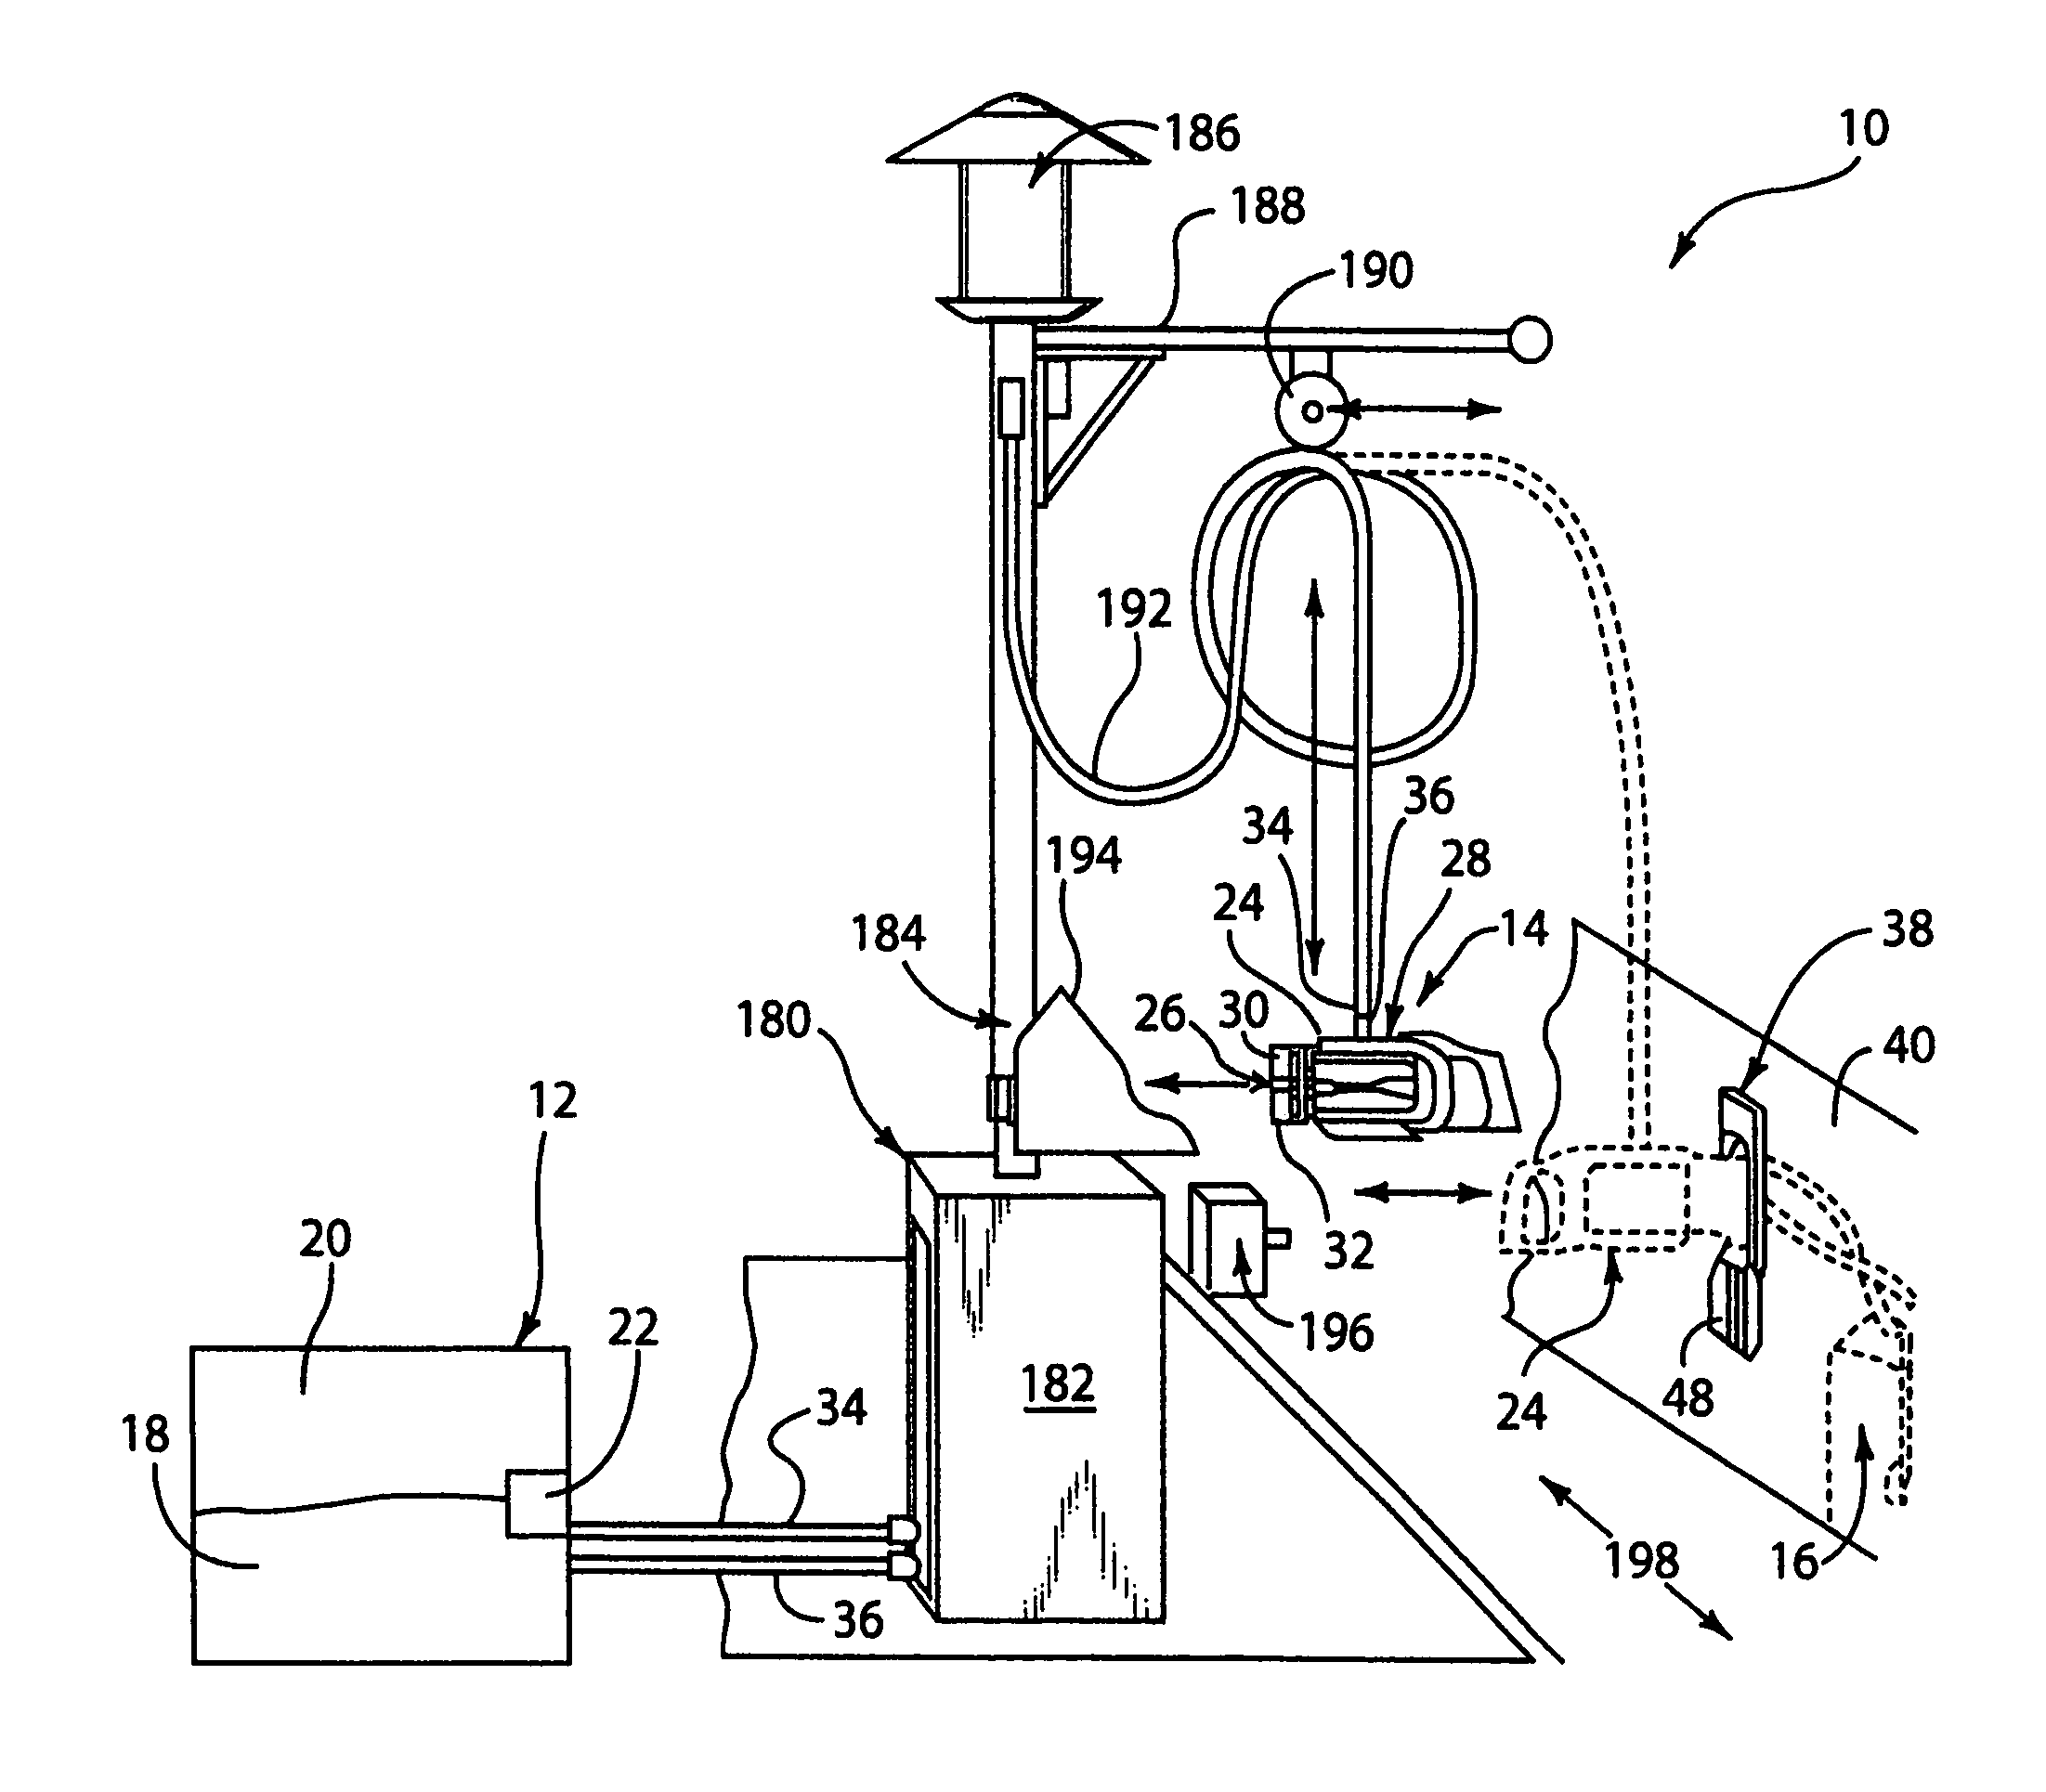 Total containment fluid delivery system